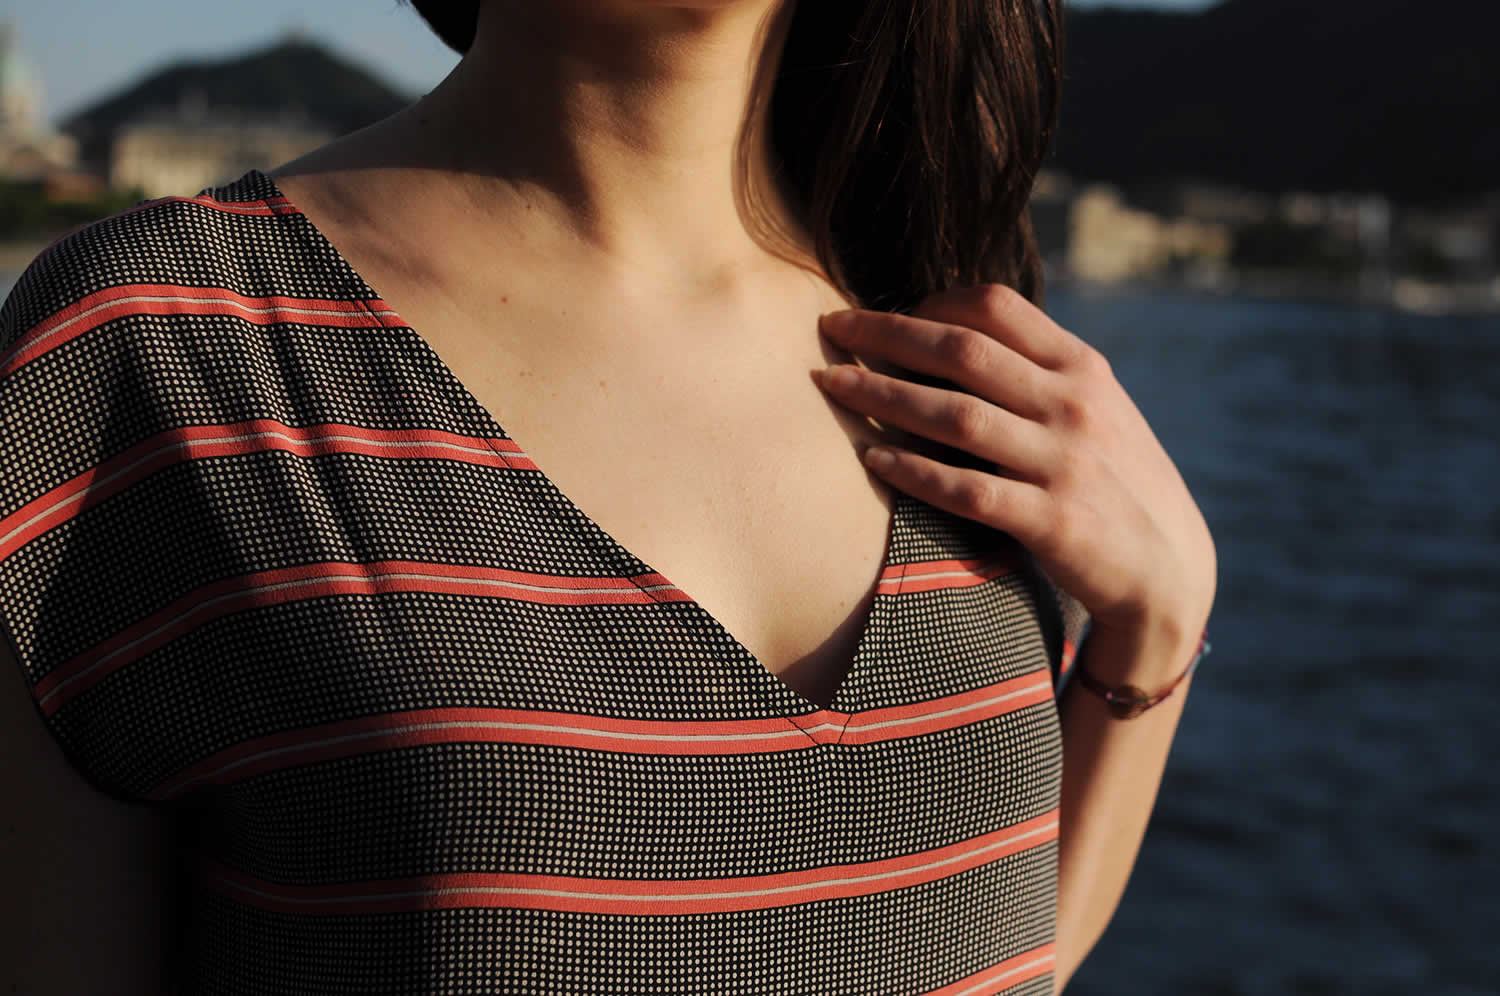 Ladulsatina sewing blog - Blog di cucito | blouse in vintage fabric - neckline detail